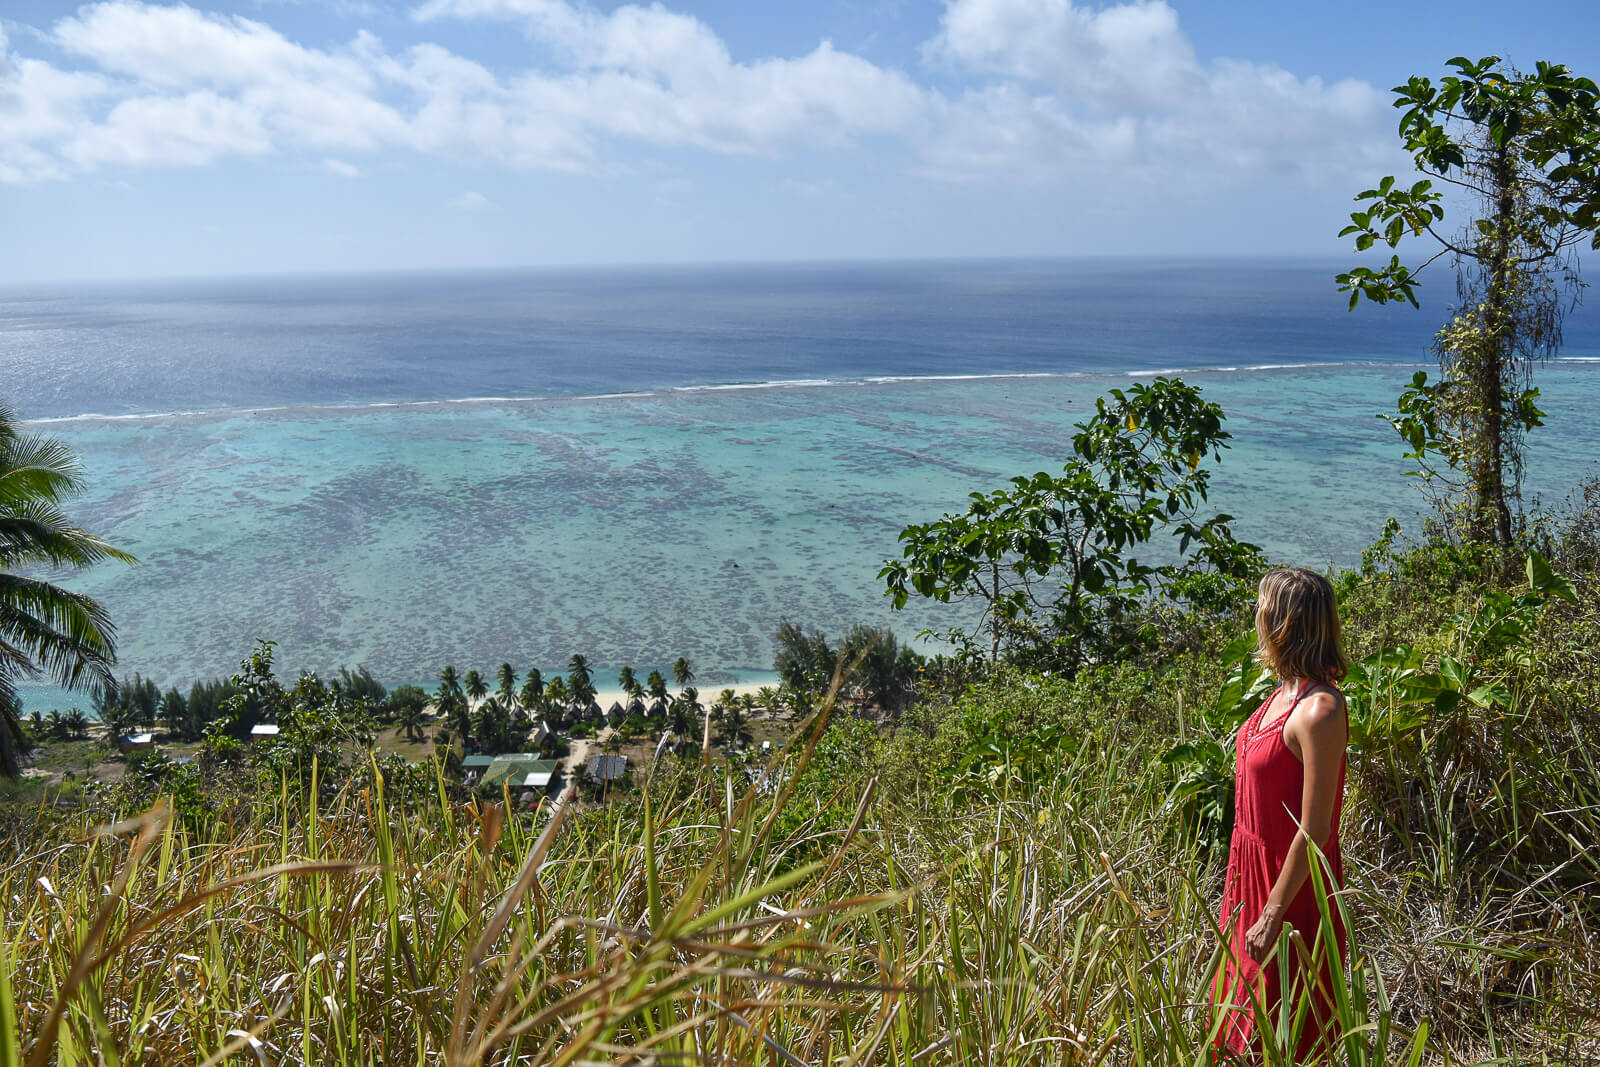 Hayley looking out over the lagoon on Aitutaki from the top of a hill